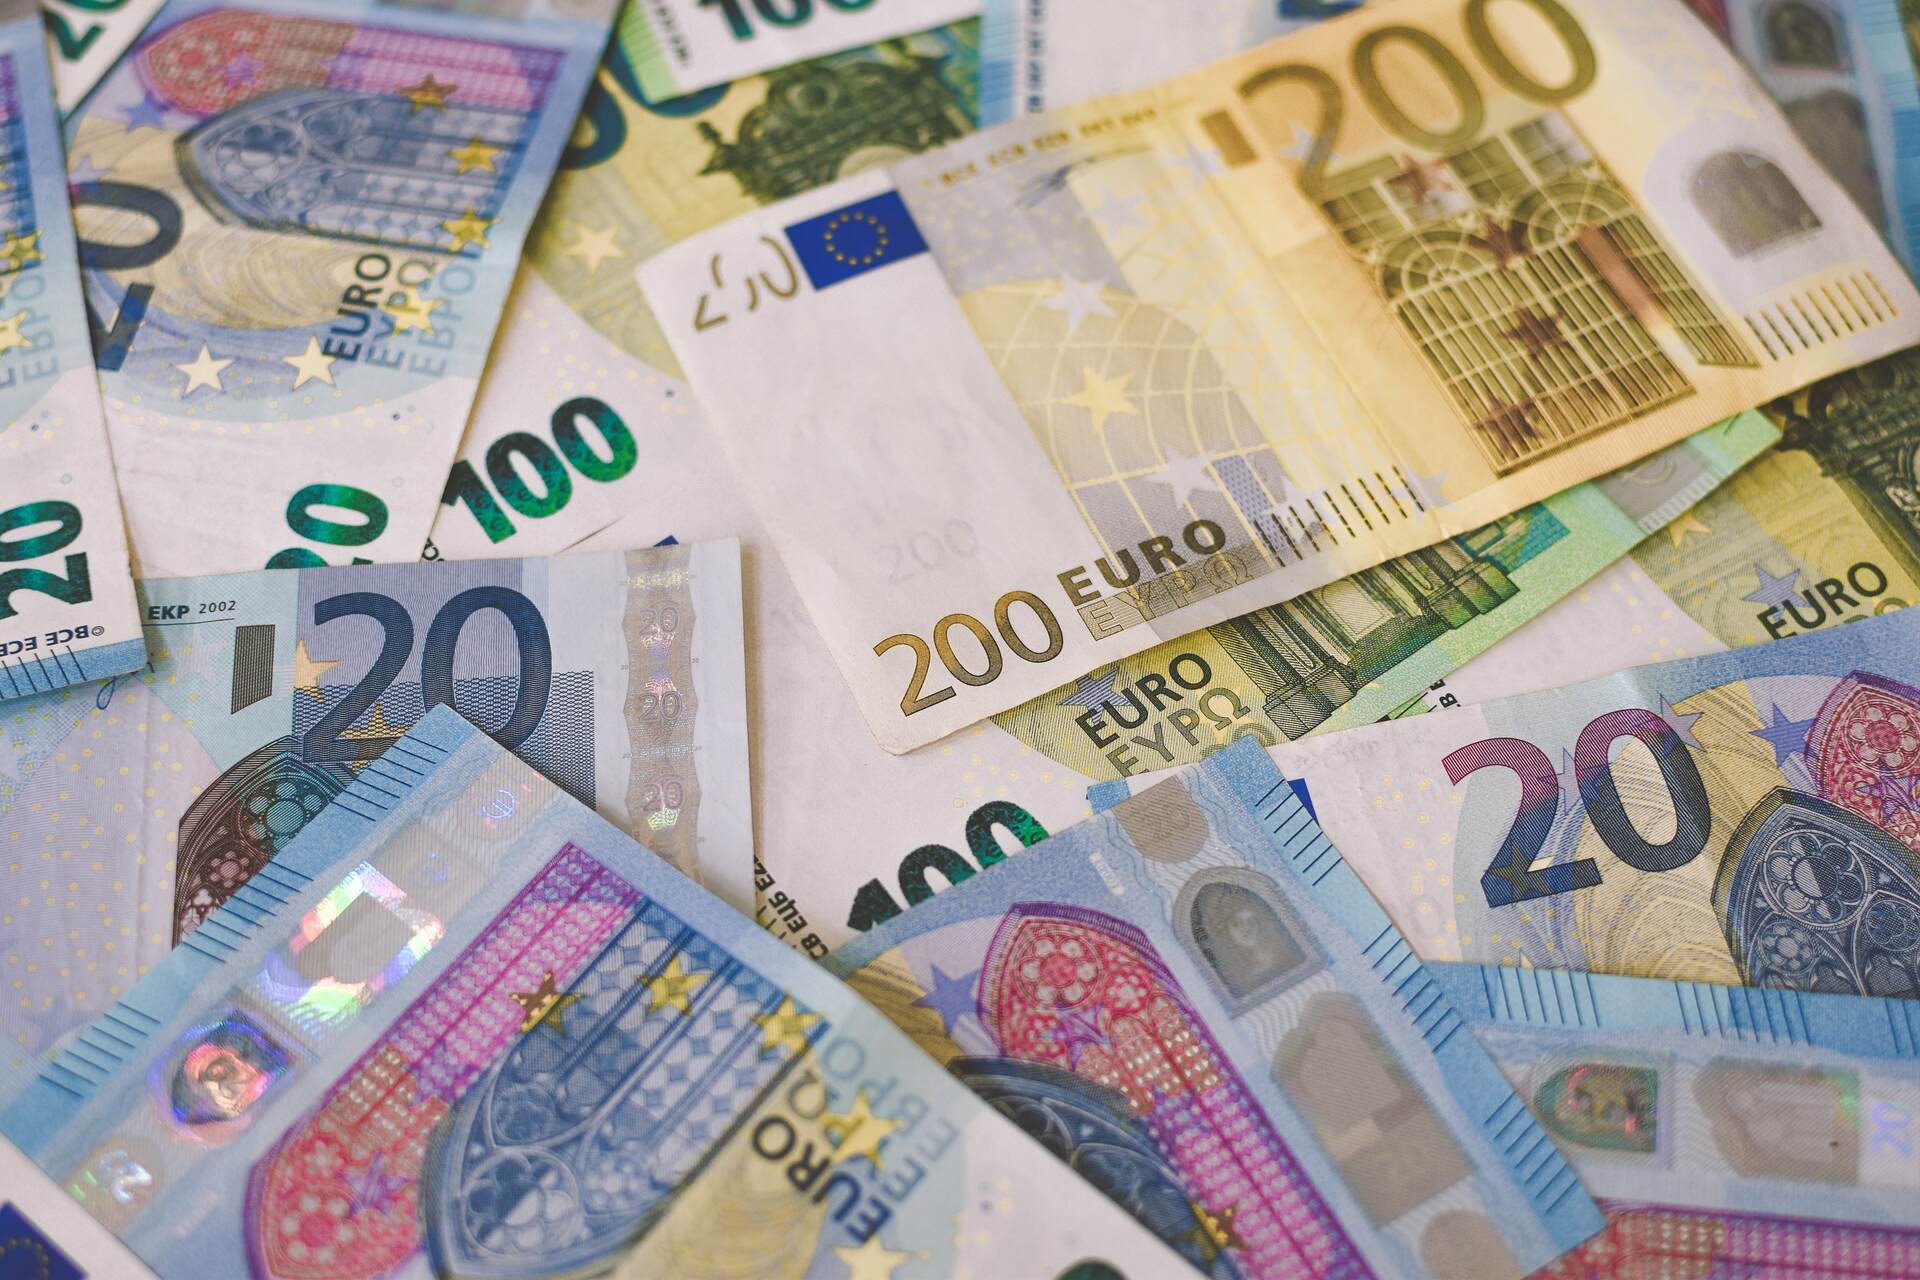 Different Euro bills spread over a surface